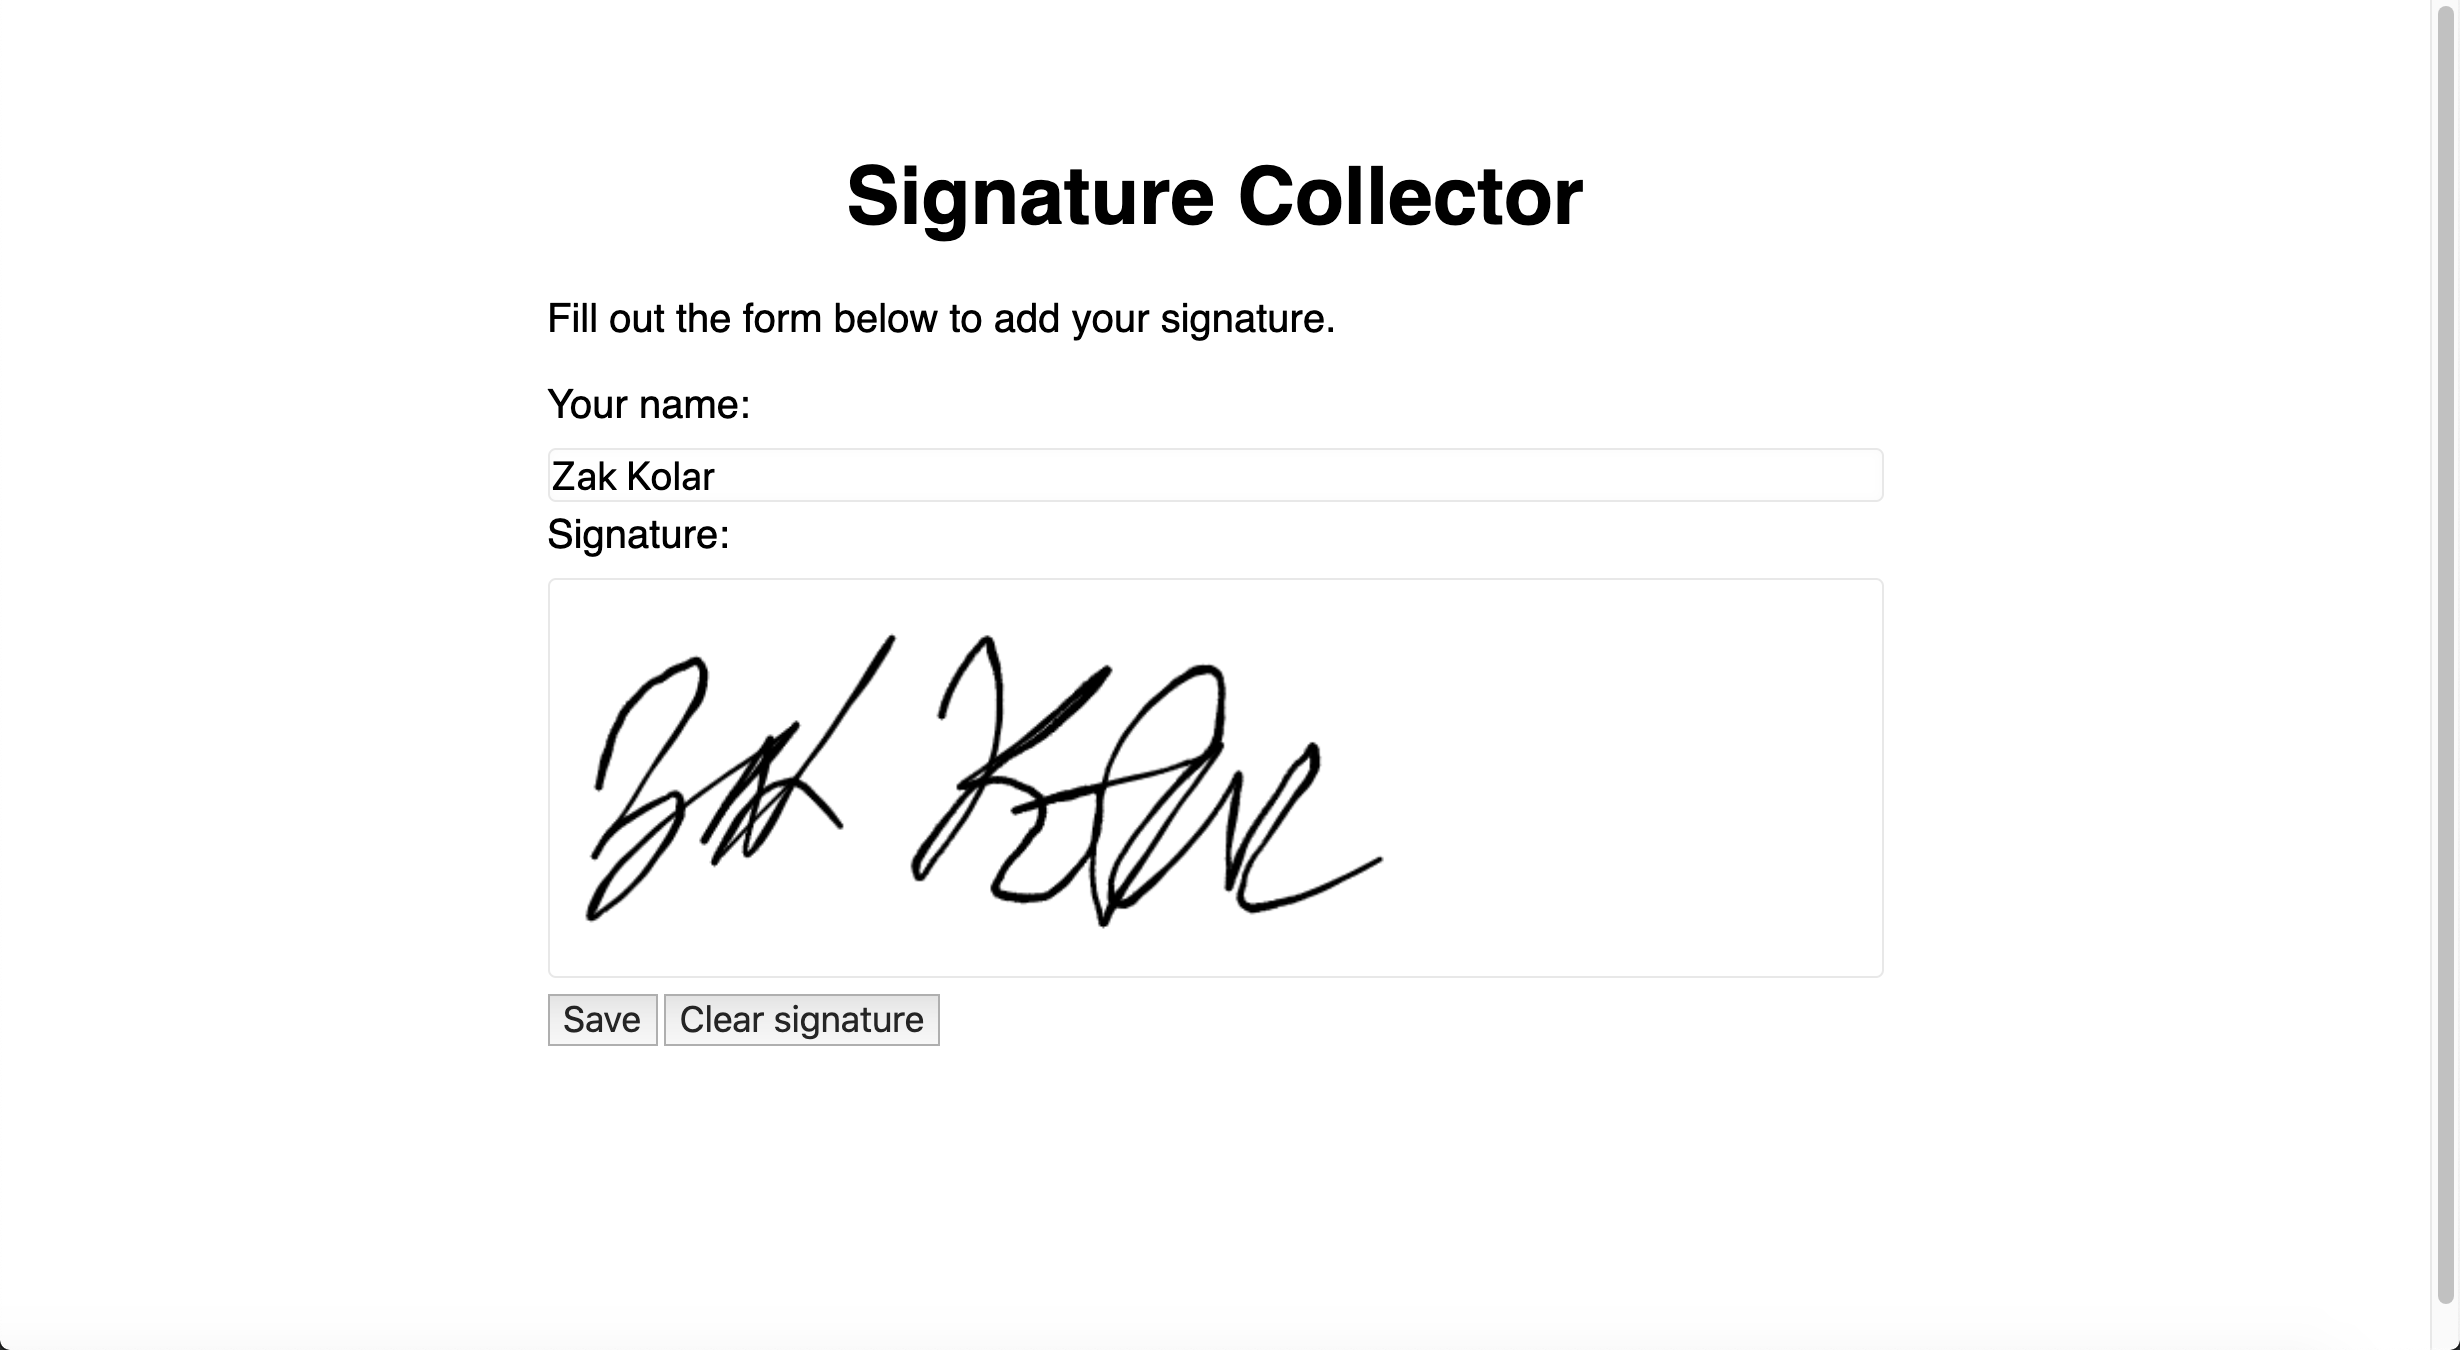 Screenshot of a form with a space for users to type their name and draw their signature.